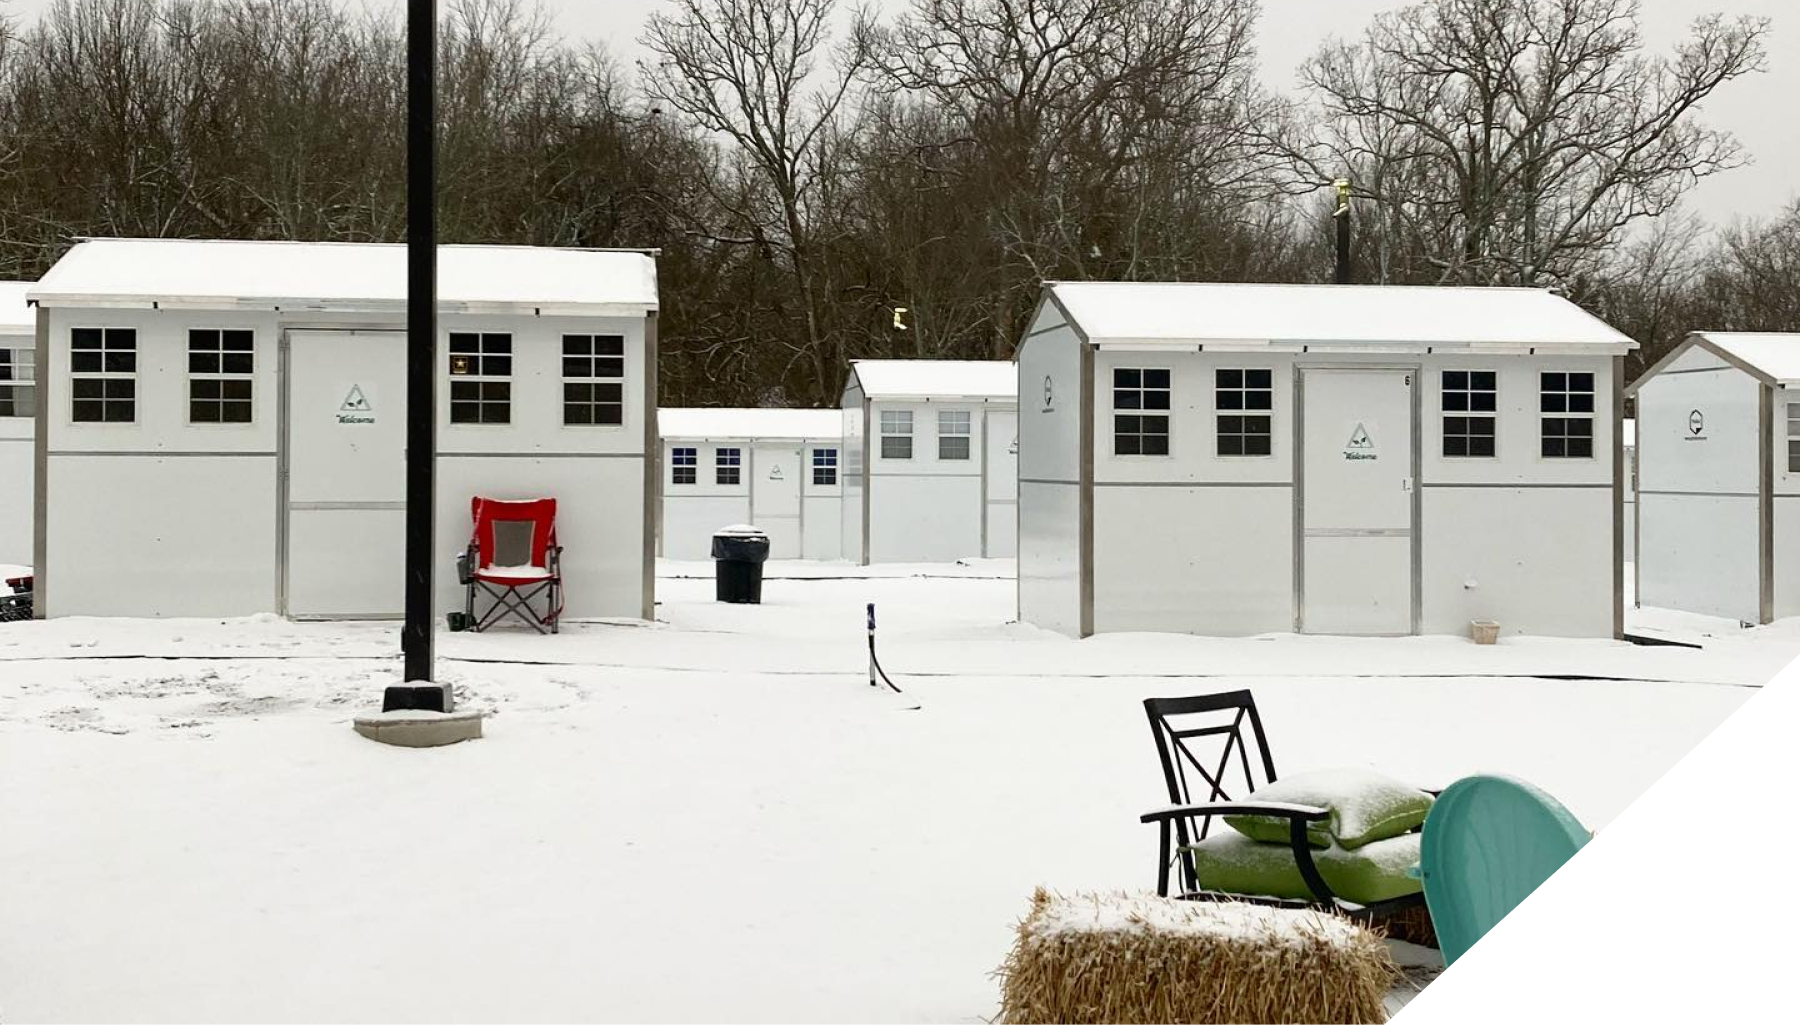 A snow-covered Pallet shelter village.